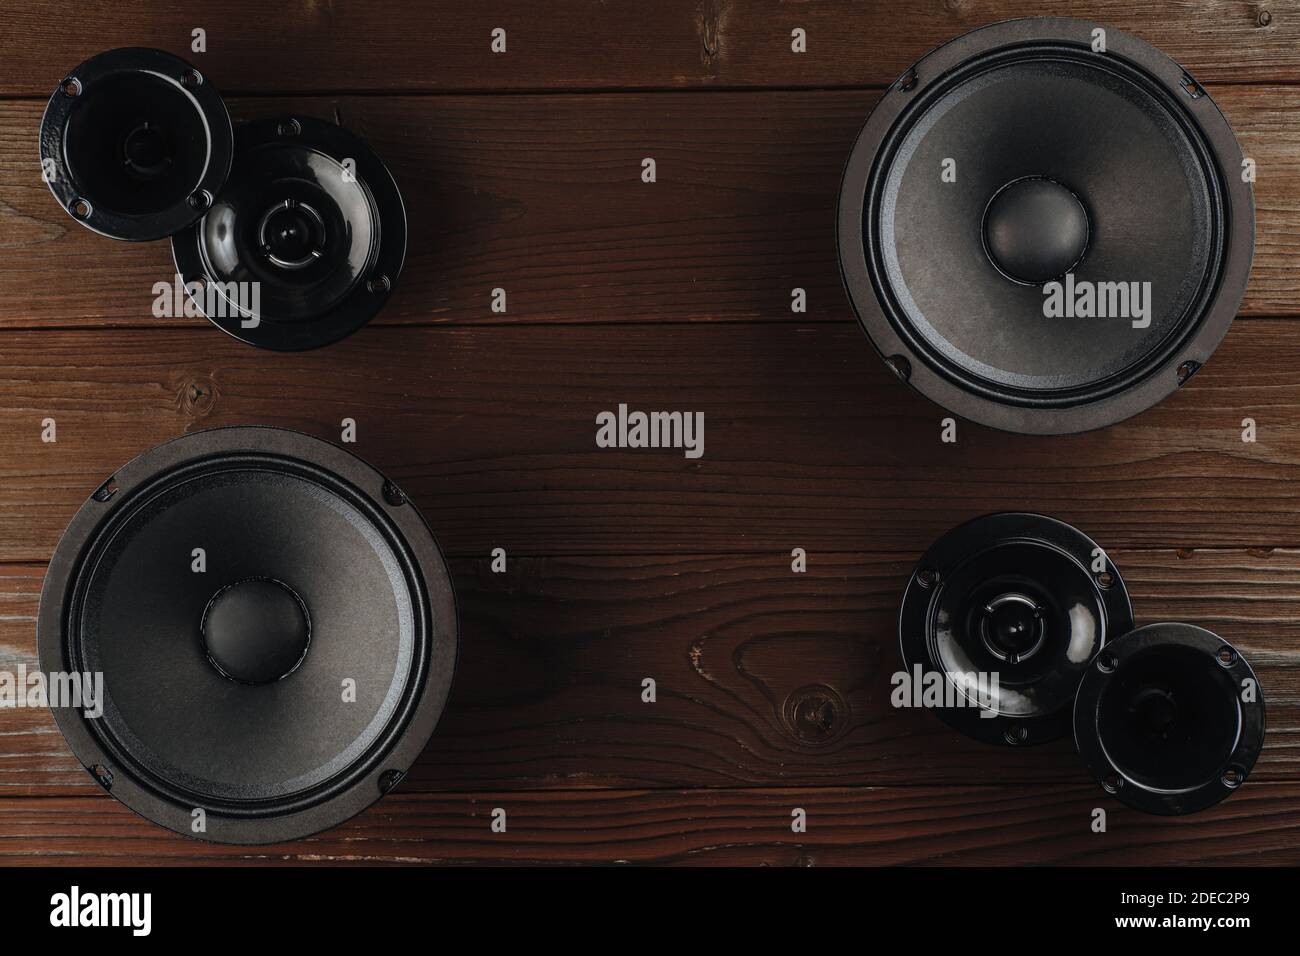 Car audio, black car speakers lie on a brown wooden background. Stock Photo